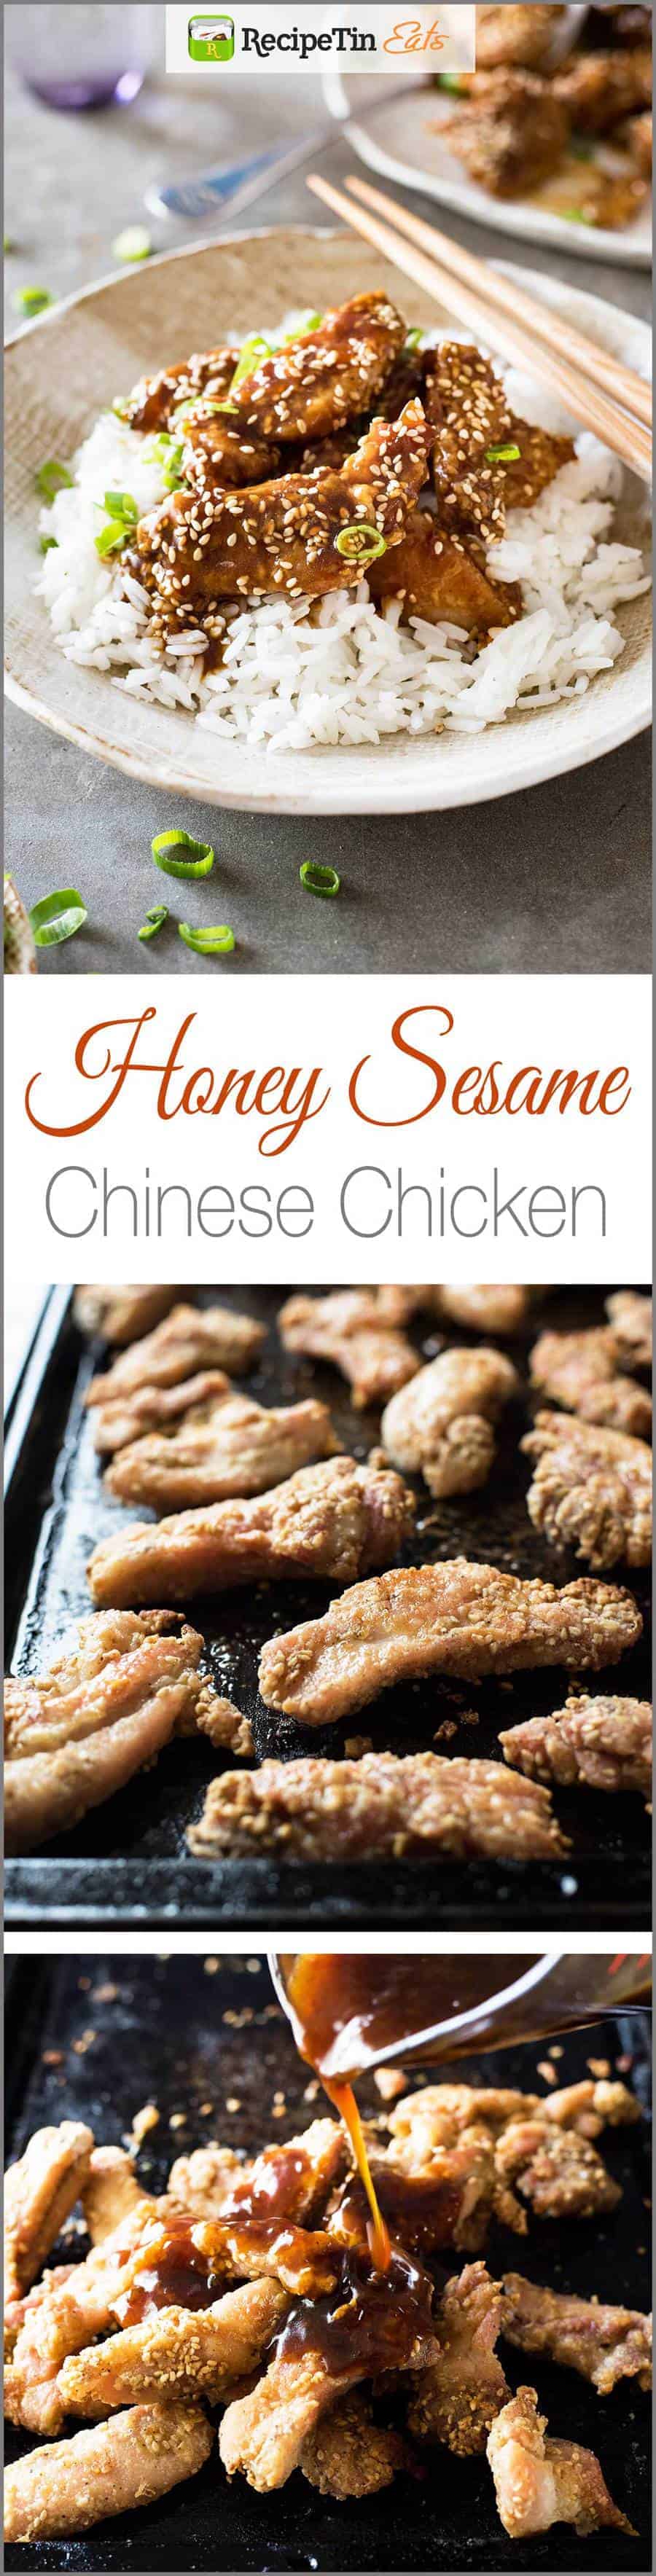 Easy Chinese Honey Sesame Chicken - BAKED, not deep fried, this chicken is coated in a gorgeous sticky irresistible sauce!